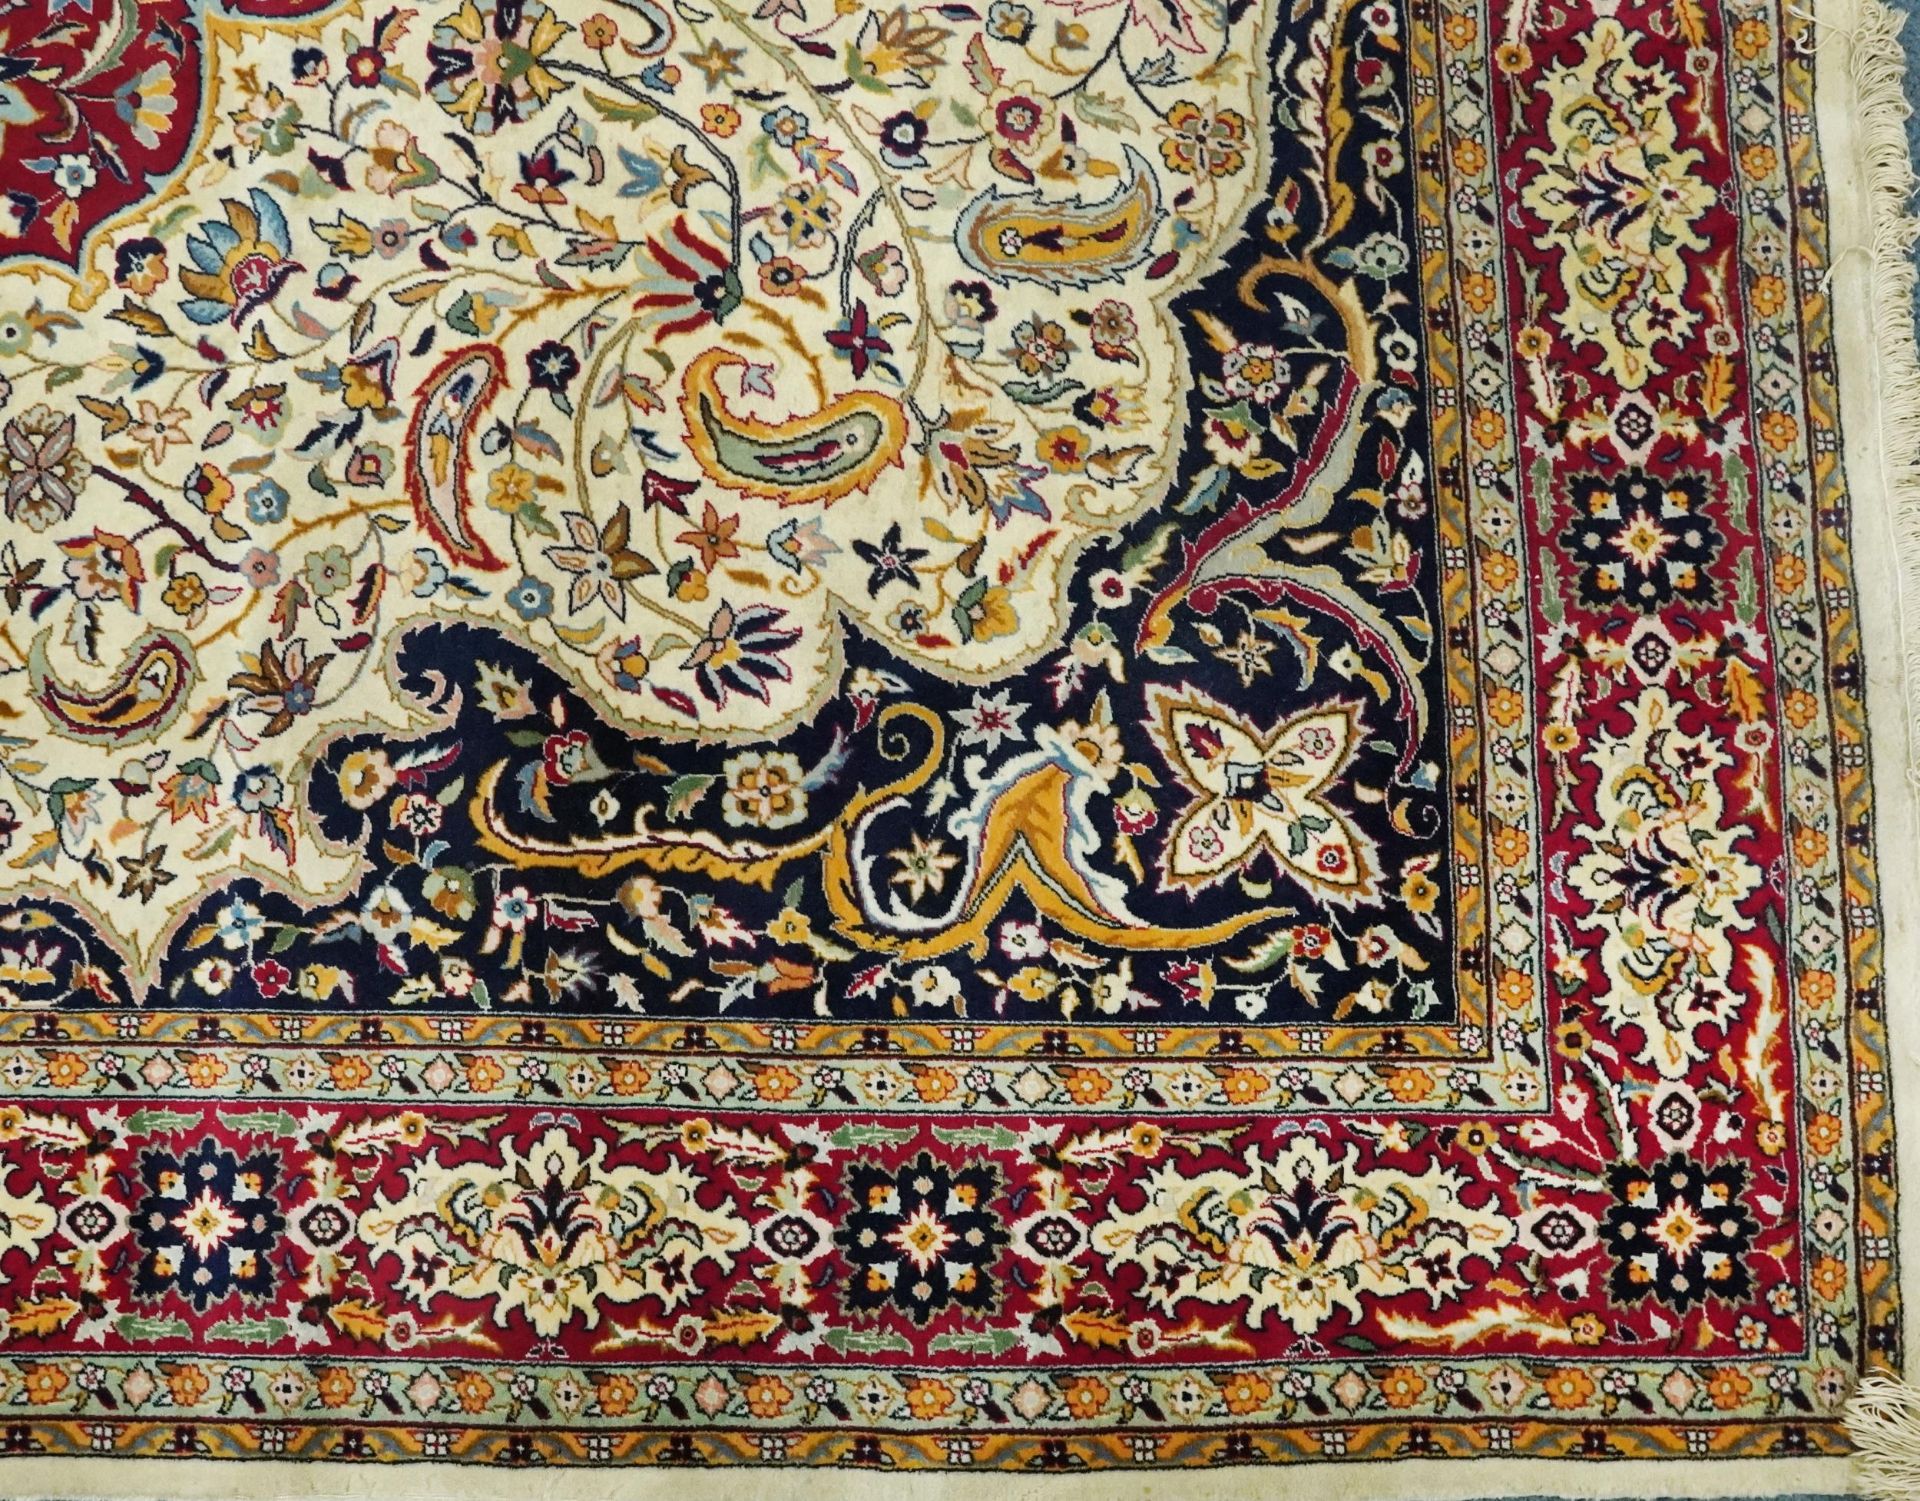 Rectangular Persian cream and red ground rug having an all over repeat floral design, 370cm x 270cm - Image 10 of 12